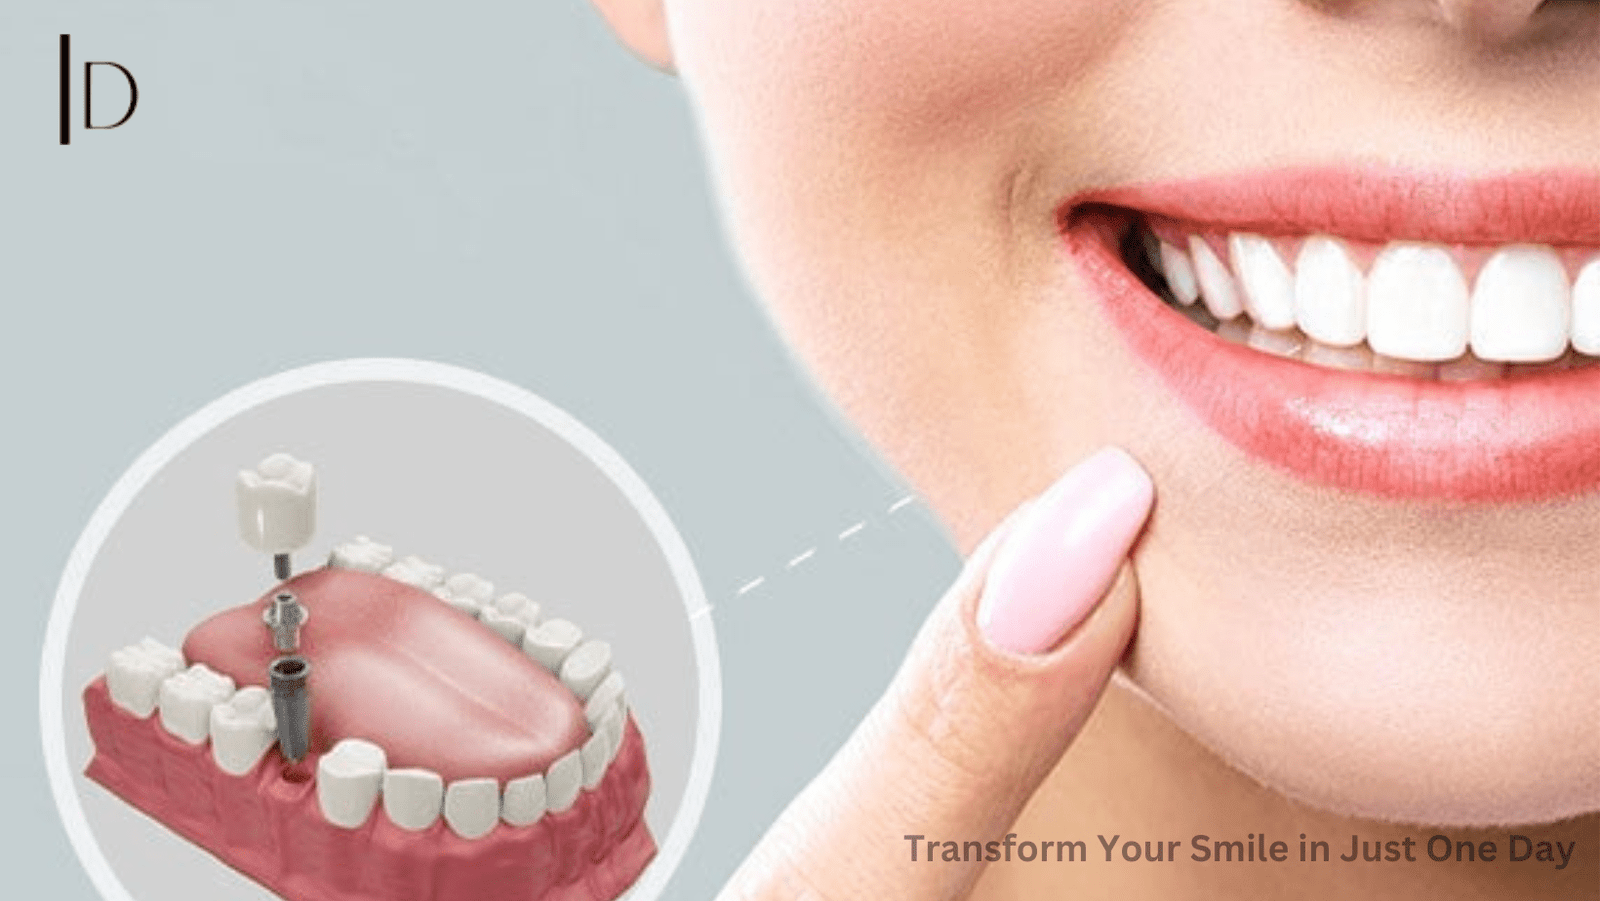 Transform Your Smile in Just One Day: The Magic of Teeth in a Day